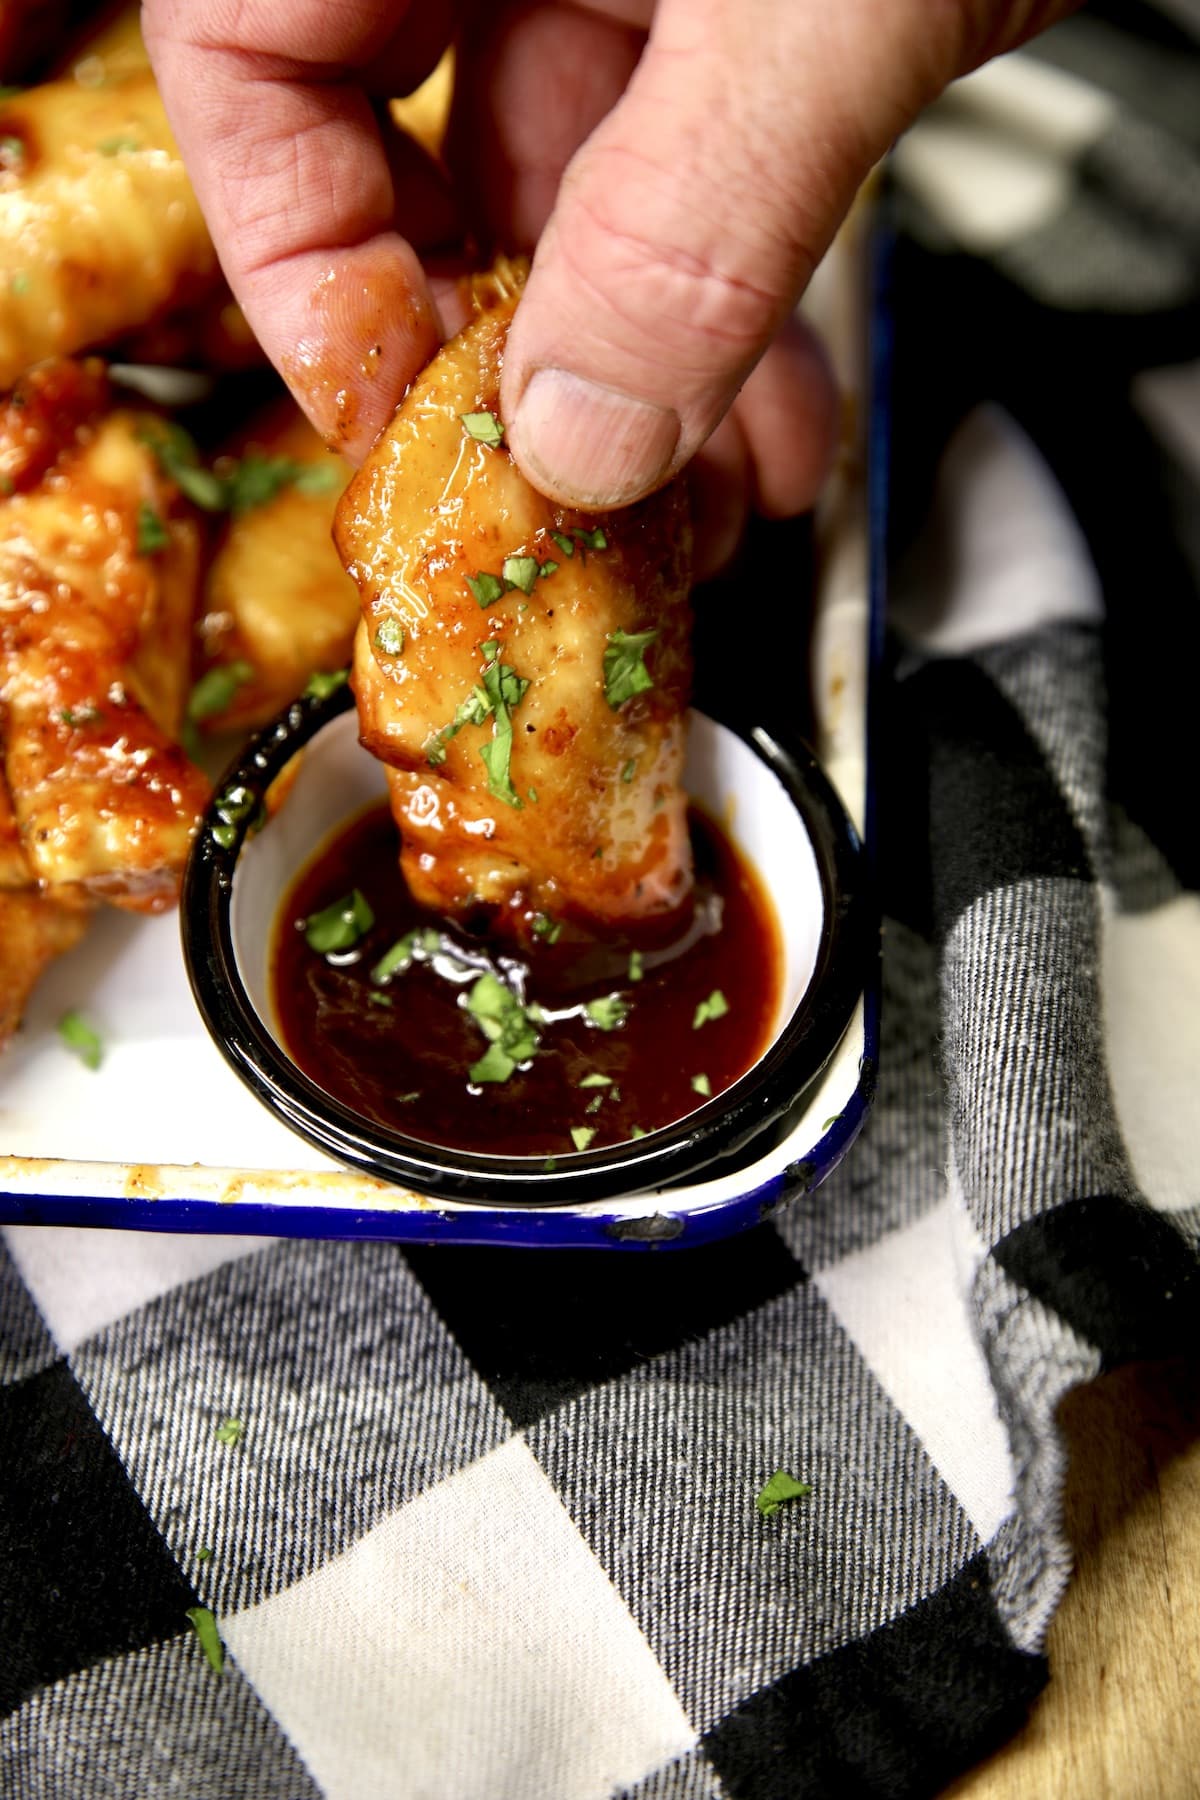 Dipping chicken wing into bbq sauce.